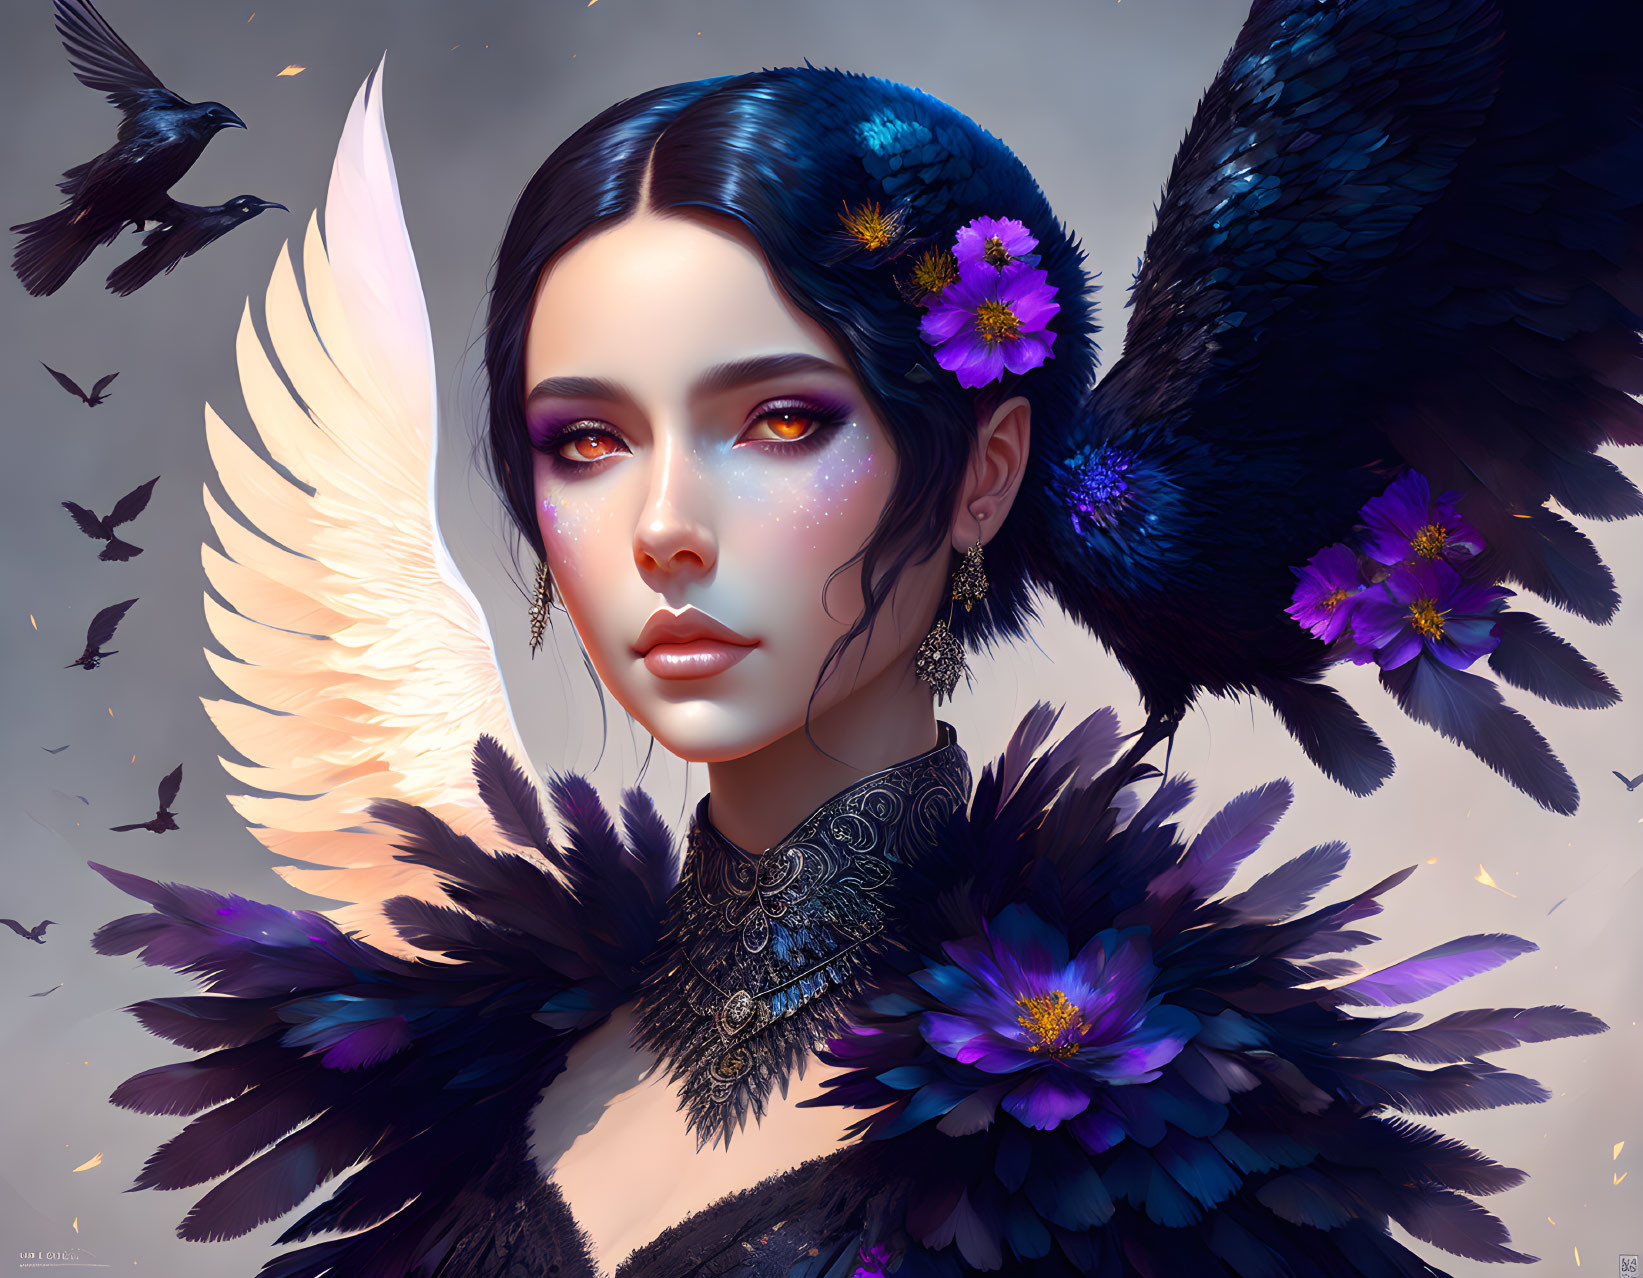 Dark-haired woman with floral hair accessories and raven in twilight setting.